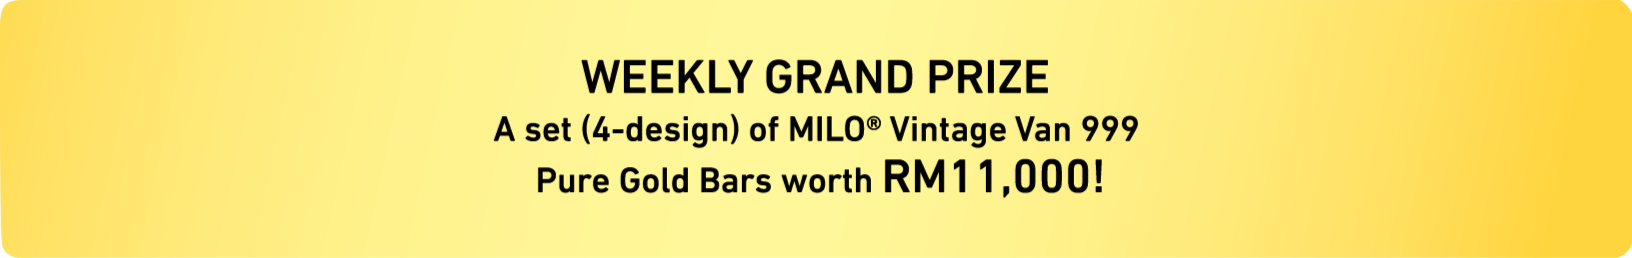 Weekly Grand Prize